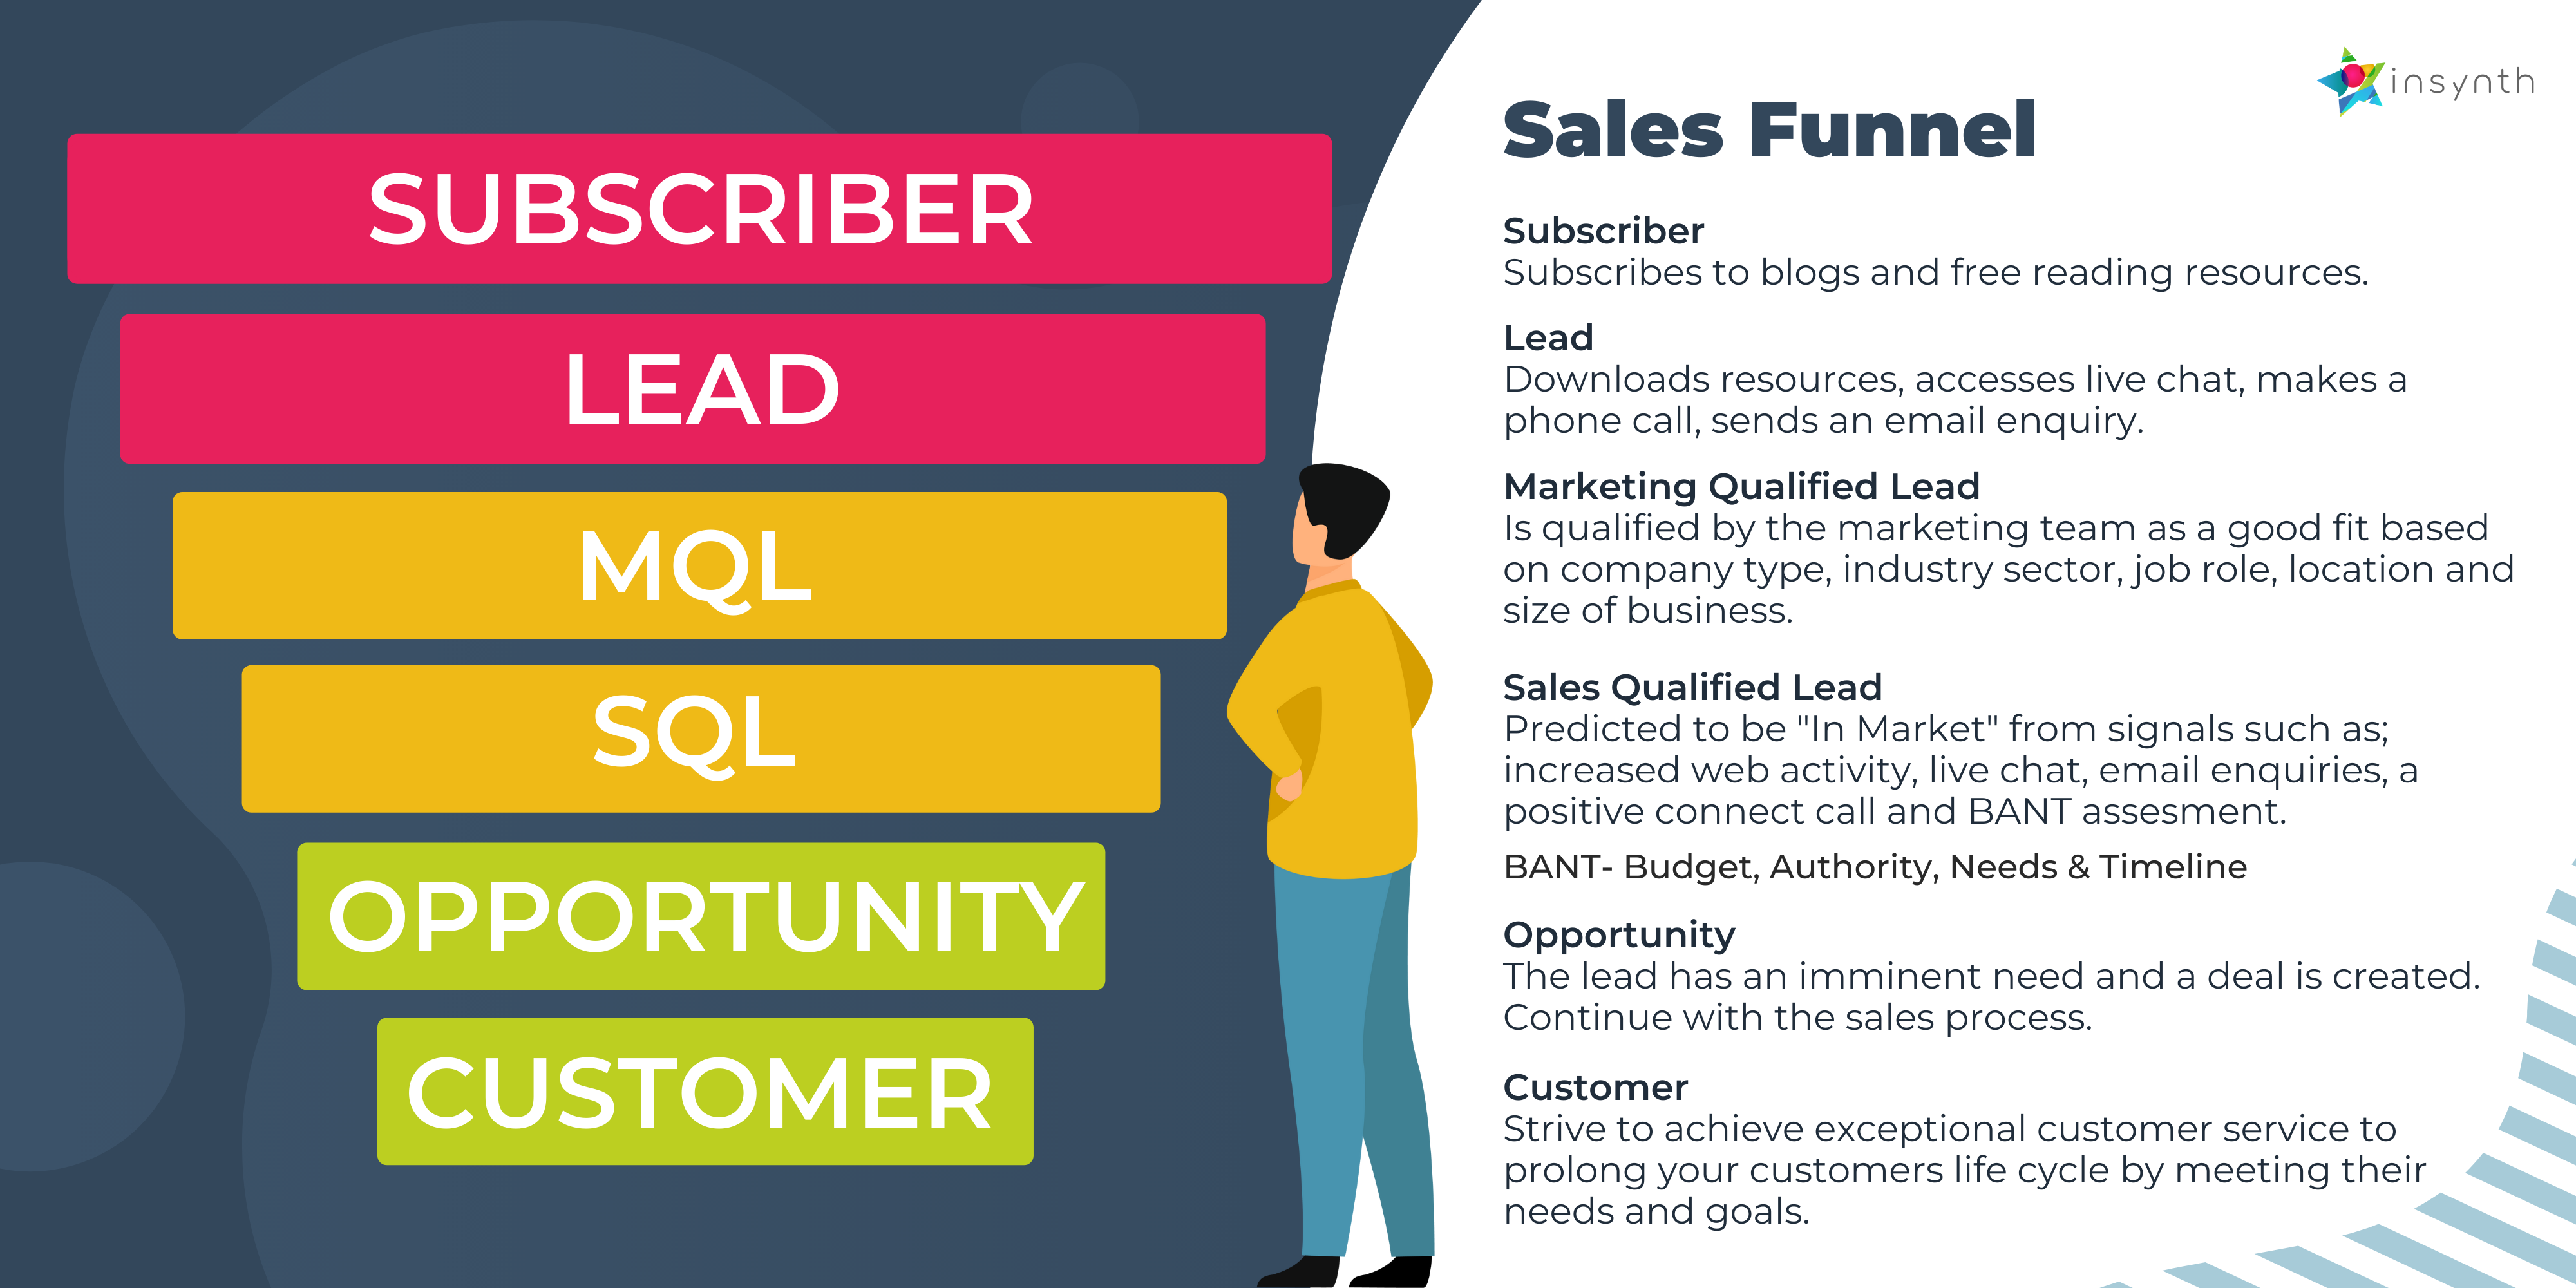 6 stages of the sales funnel: subscriber, lead, marketing qualified lead, sales qualified lead, opportunity and customer.